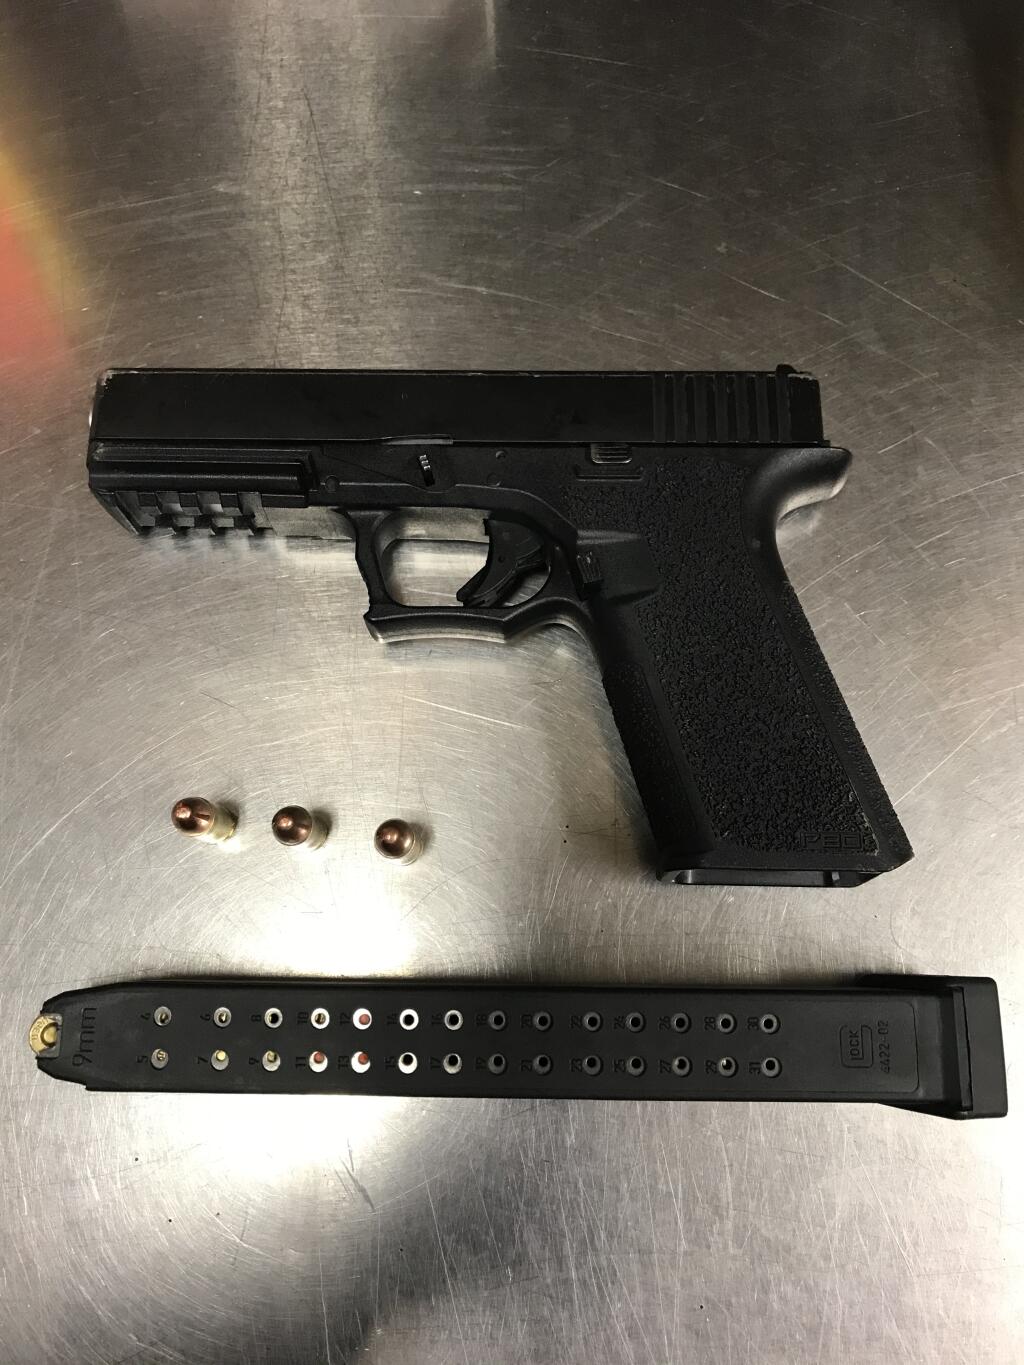 A handgun recovered by police in the shooting arrest of a 21-year-old Santa Rosa man suspected of illegally firing the weapon, which authorities say was unregistered. (Santa Rosa Police Department)